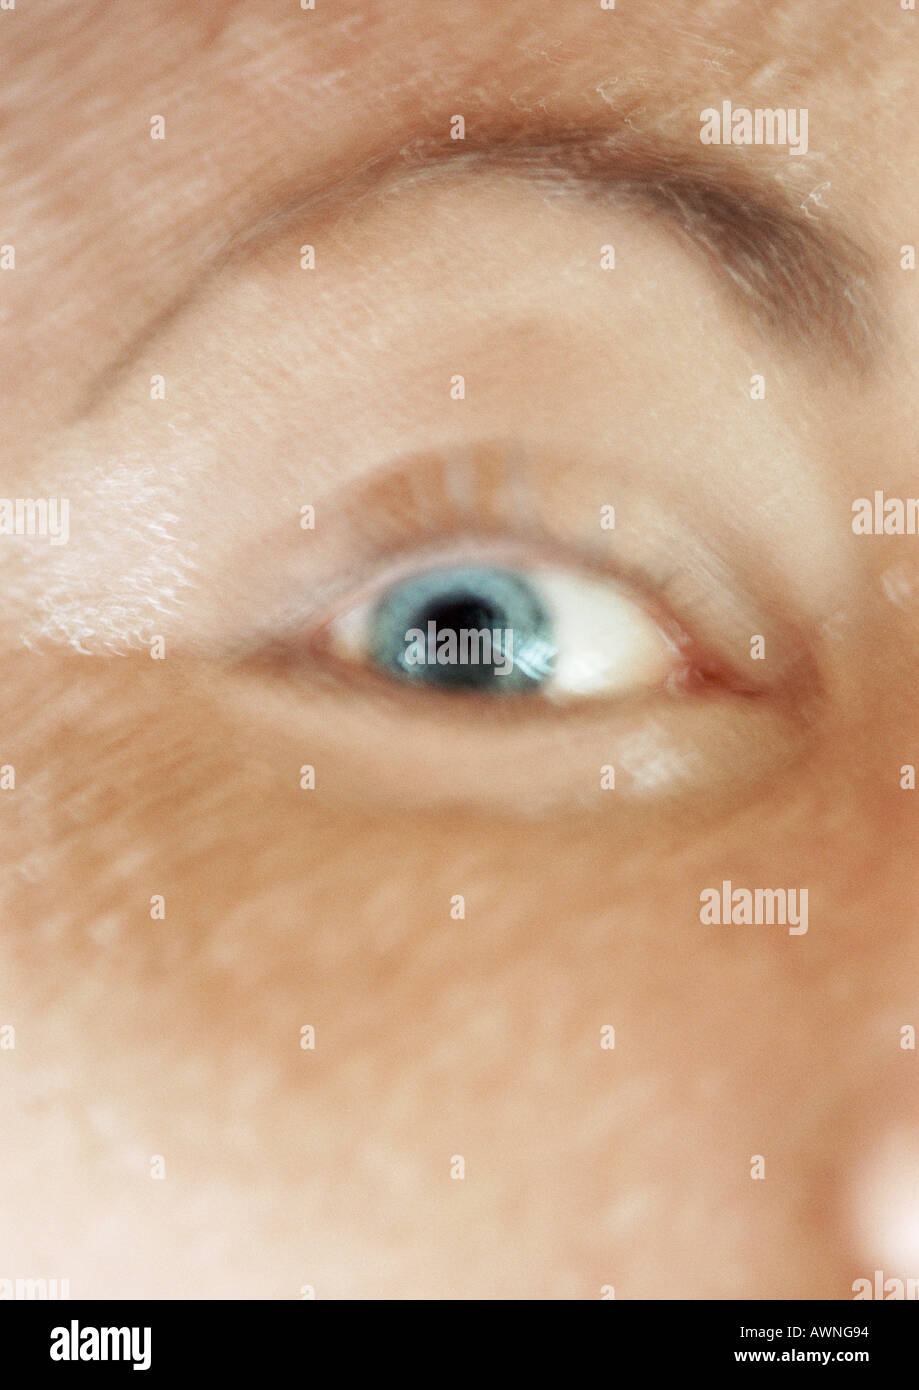 Woman's blue eye and raised eyebrow, close up, blurred. Stock Photo